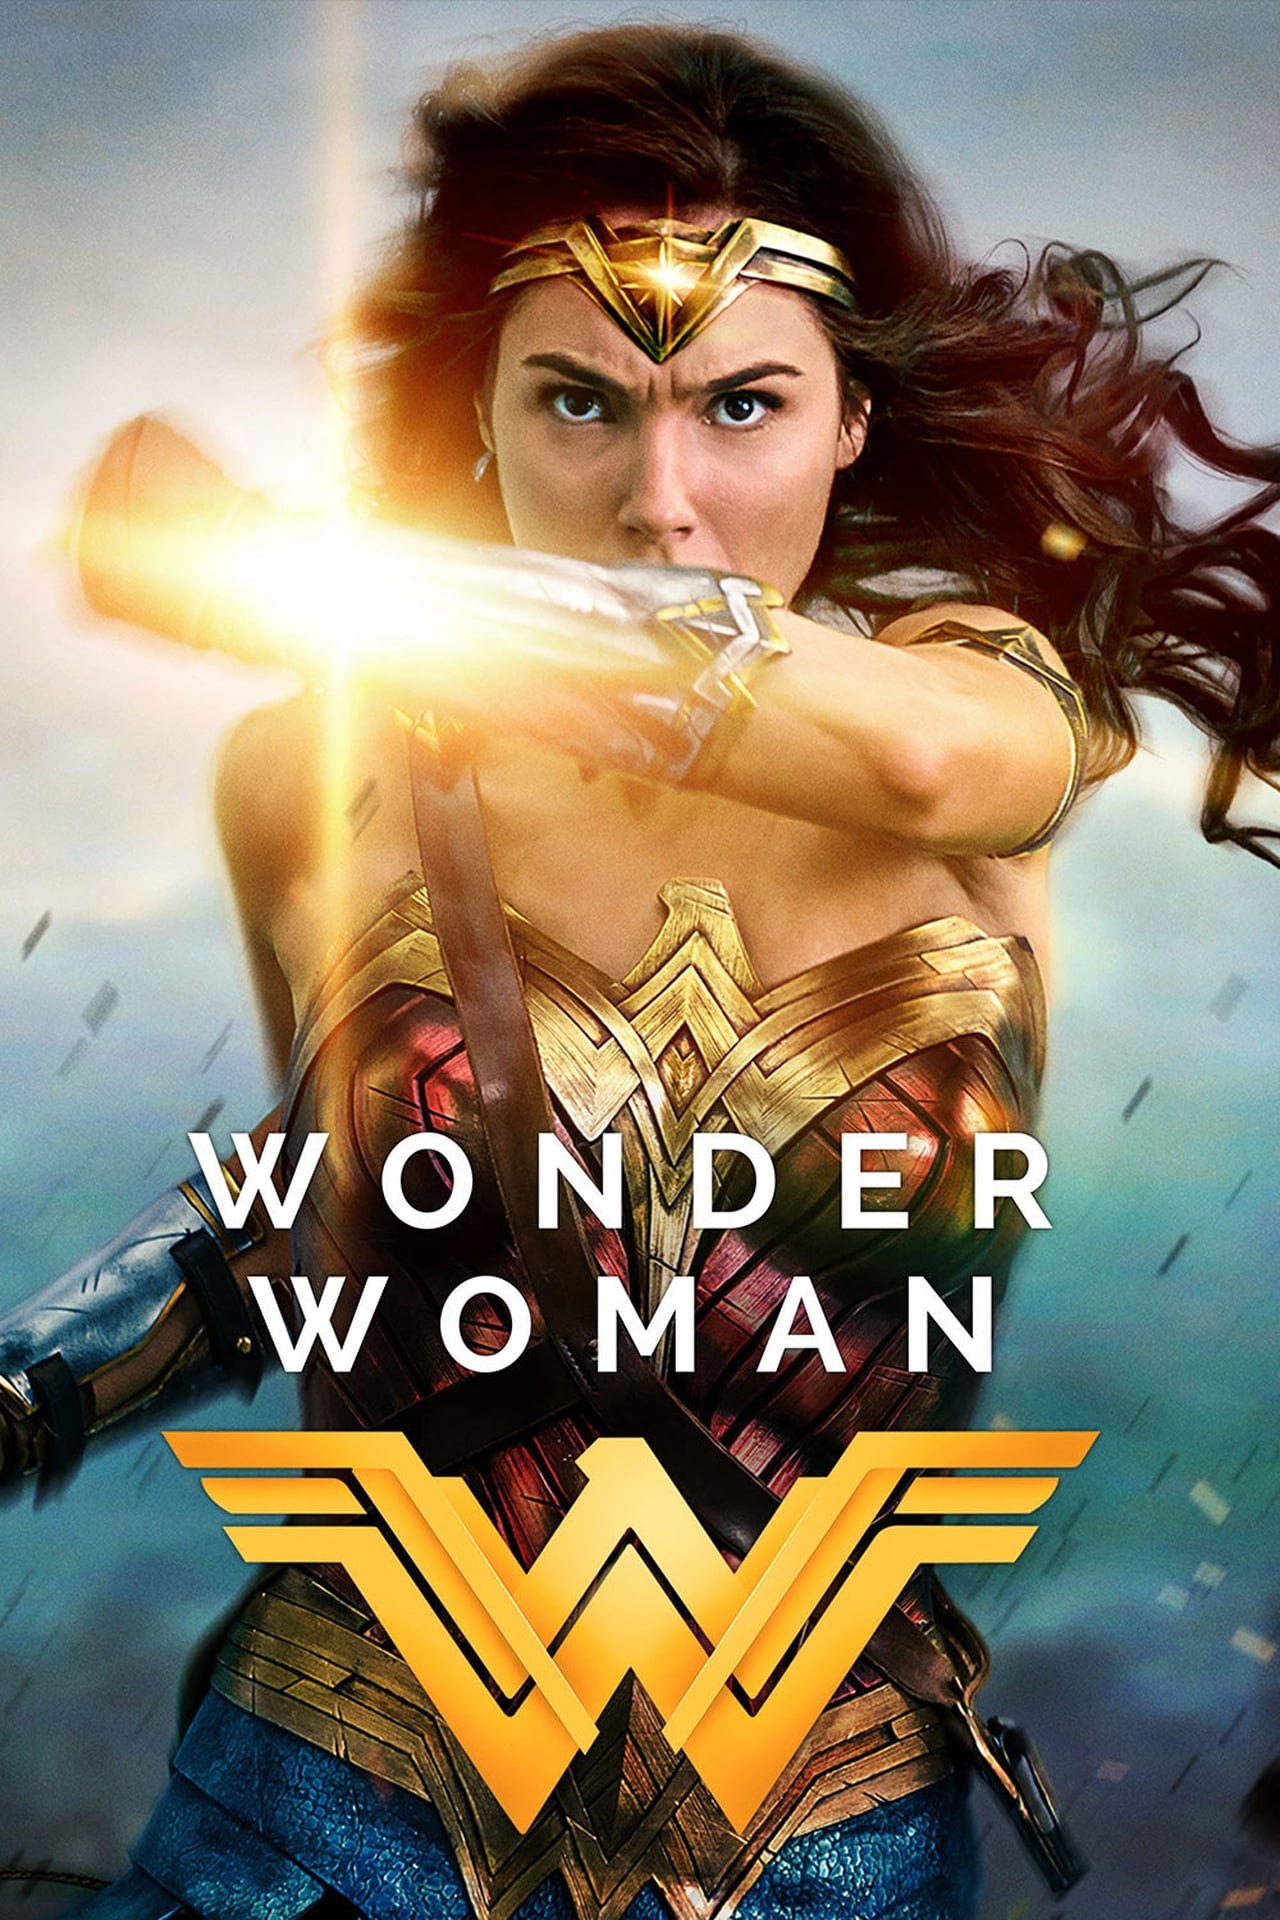 Watch Full Wonder Woman (2017) Movies Trailer at thrill.mouflix.us